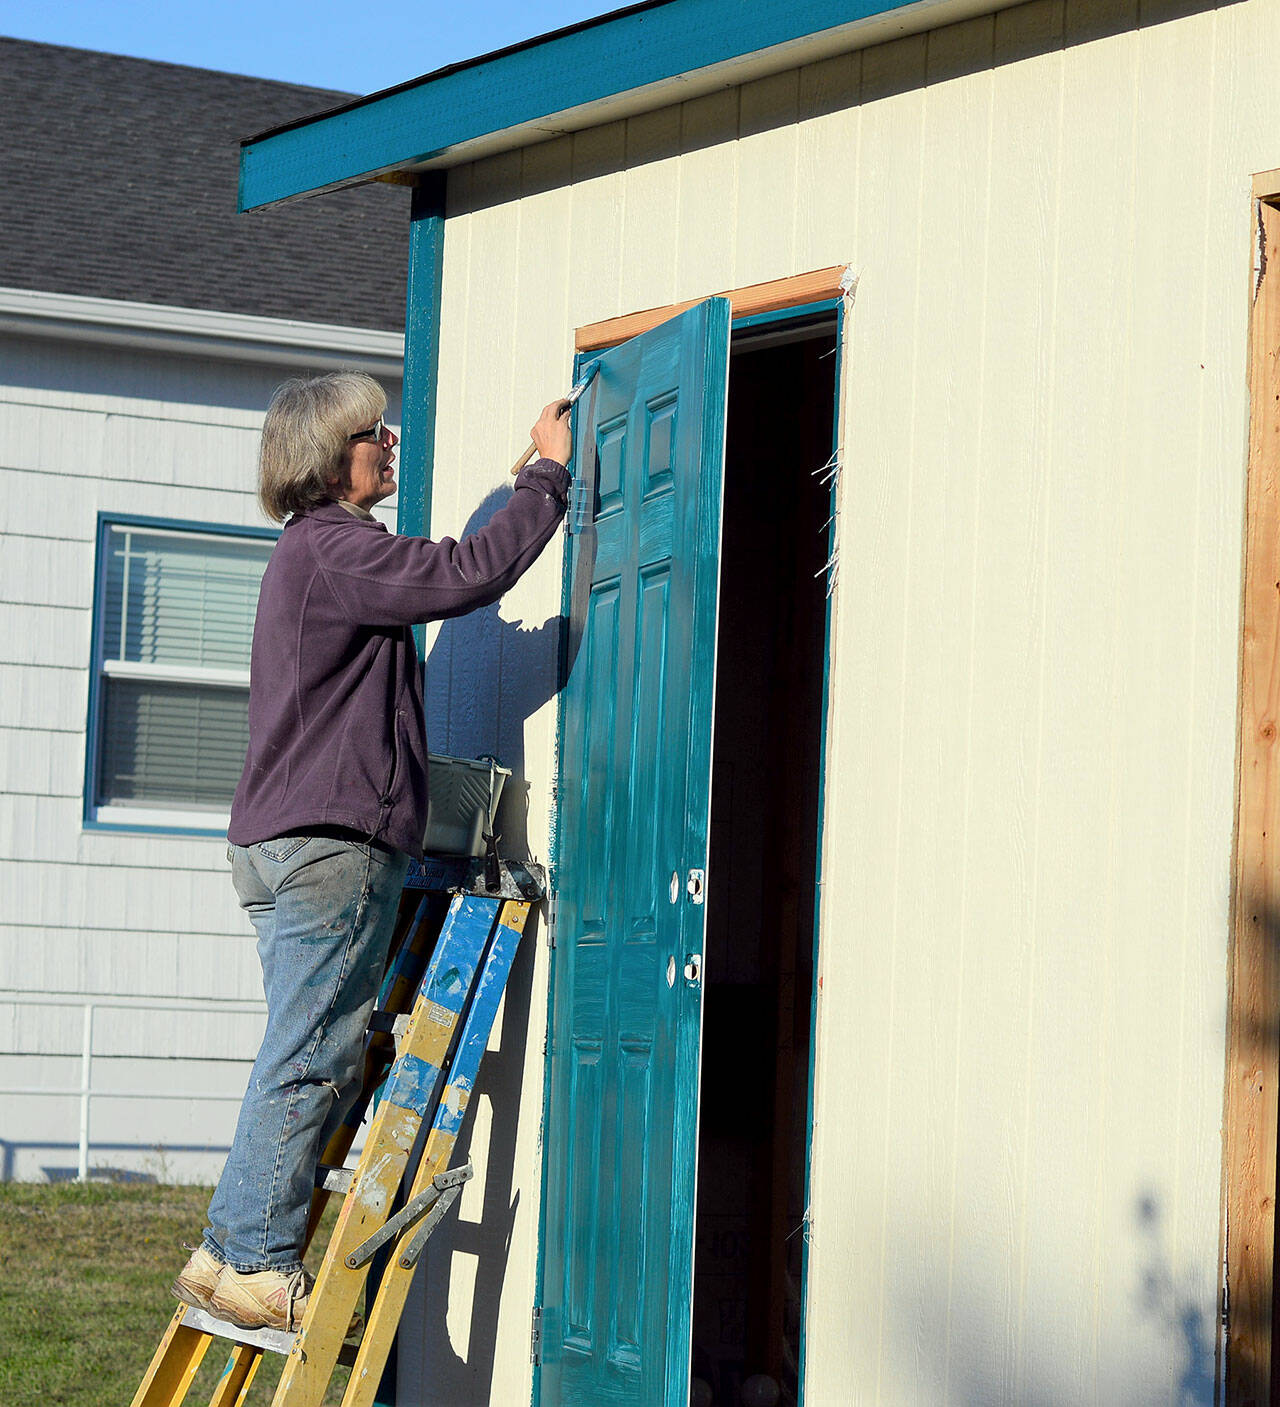 Volunteer Sandy Tweed, a fine artist in Port Townsend, finishes painting a door to the Pat’s Place bathroom unit on Friday. (Diane Urbani de la Paz/Peninsula Daily News)